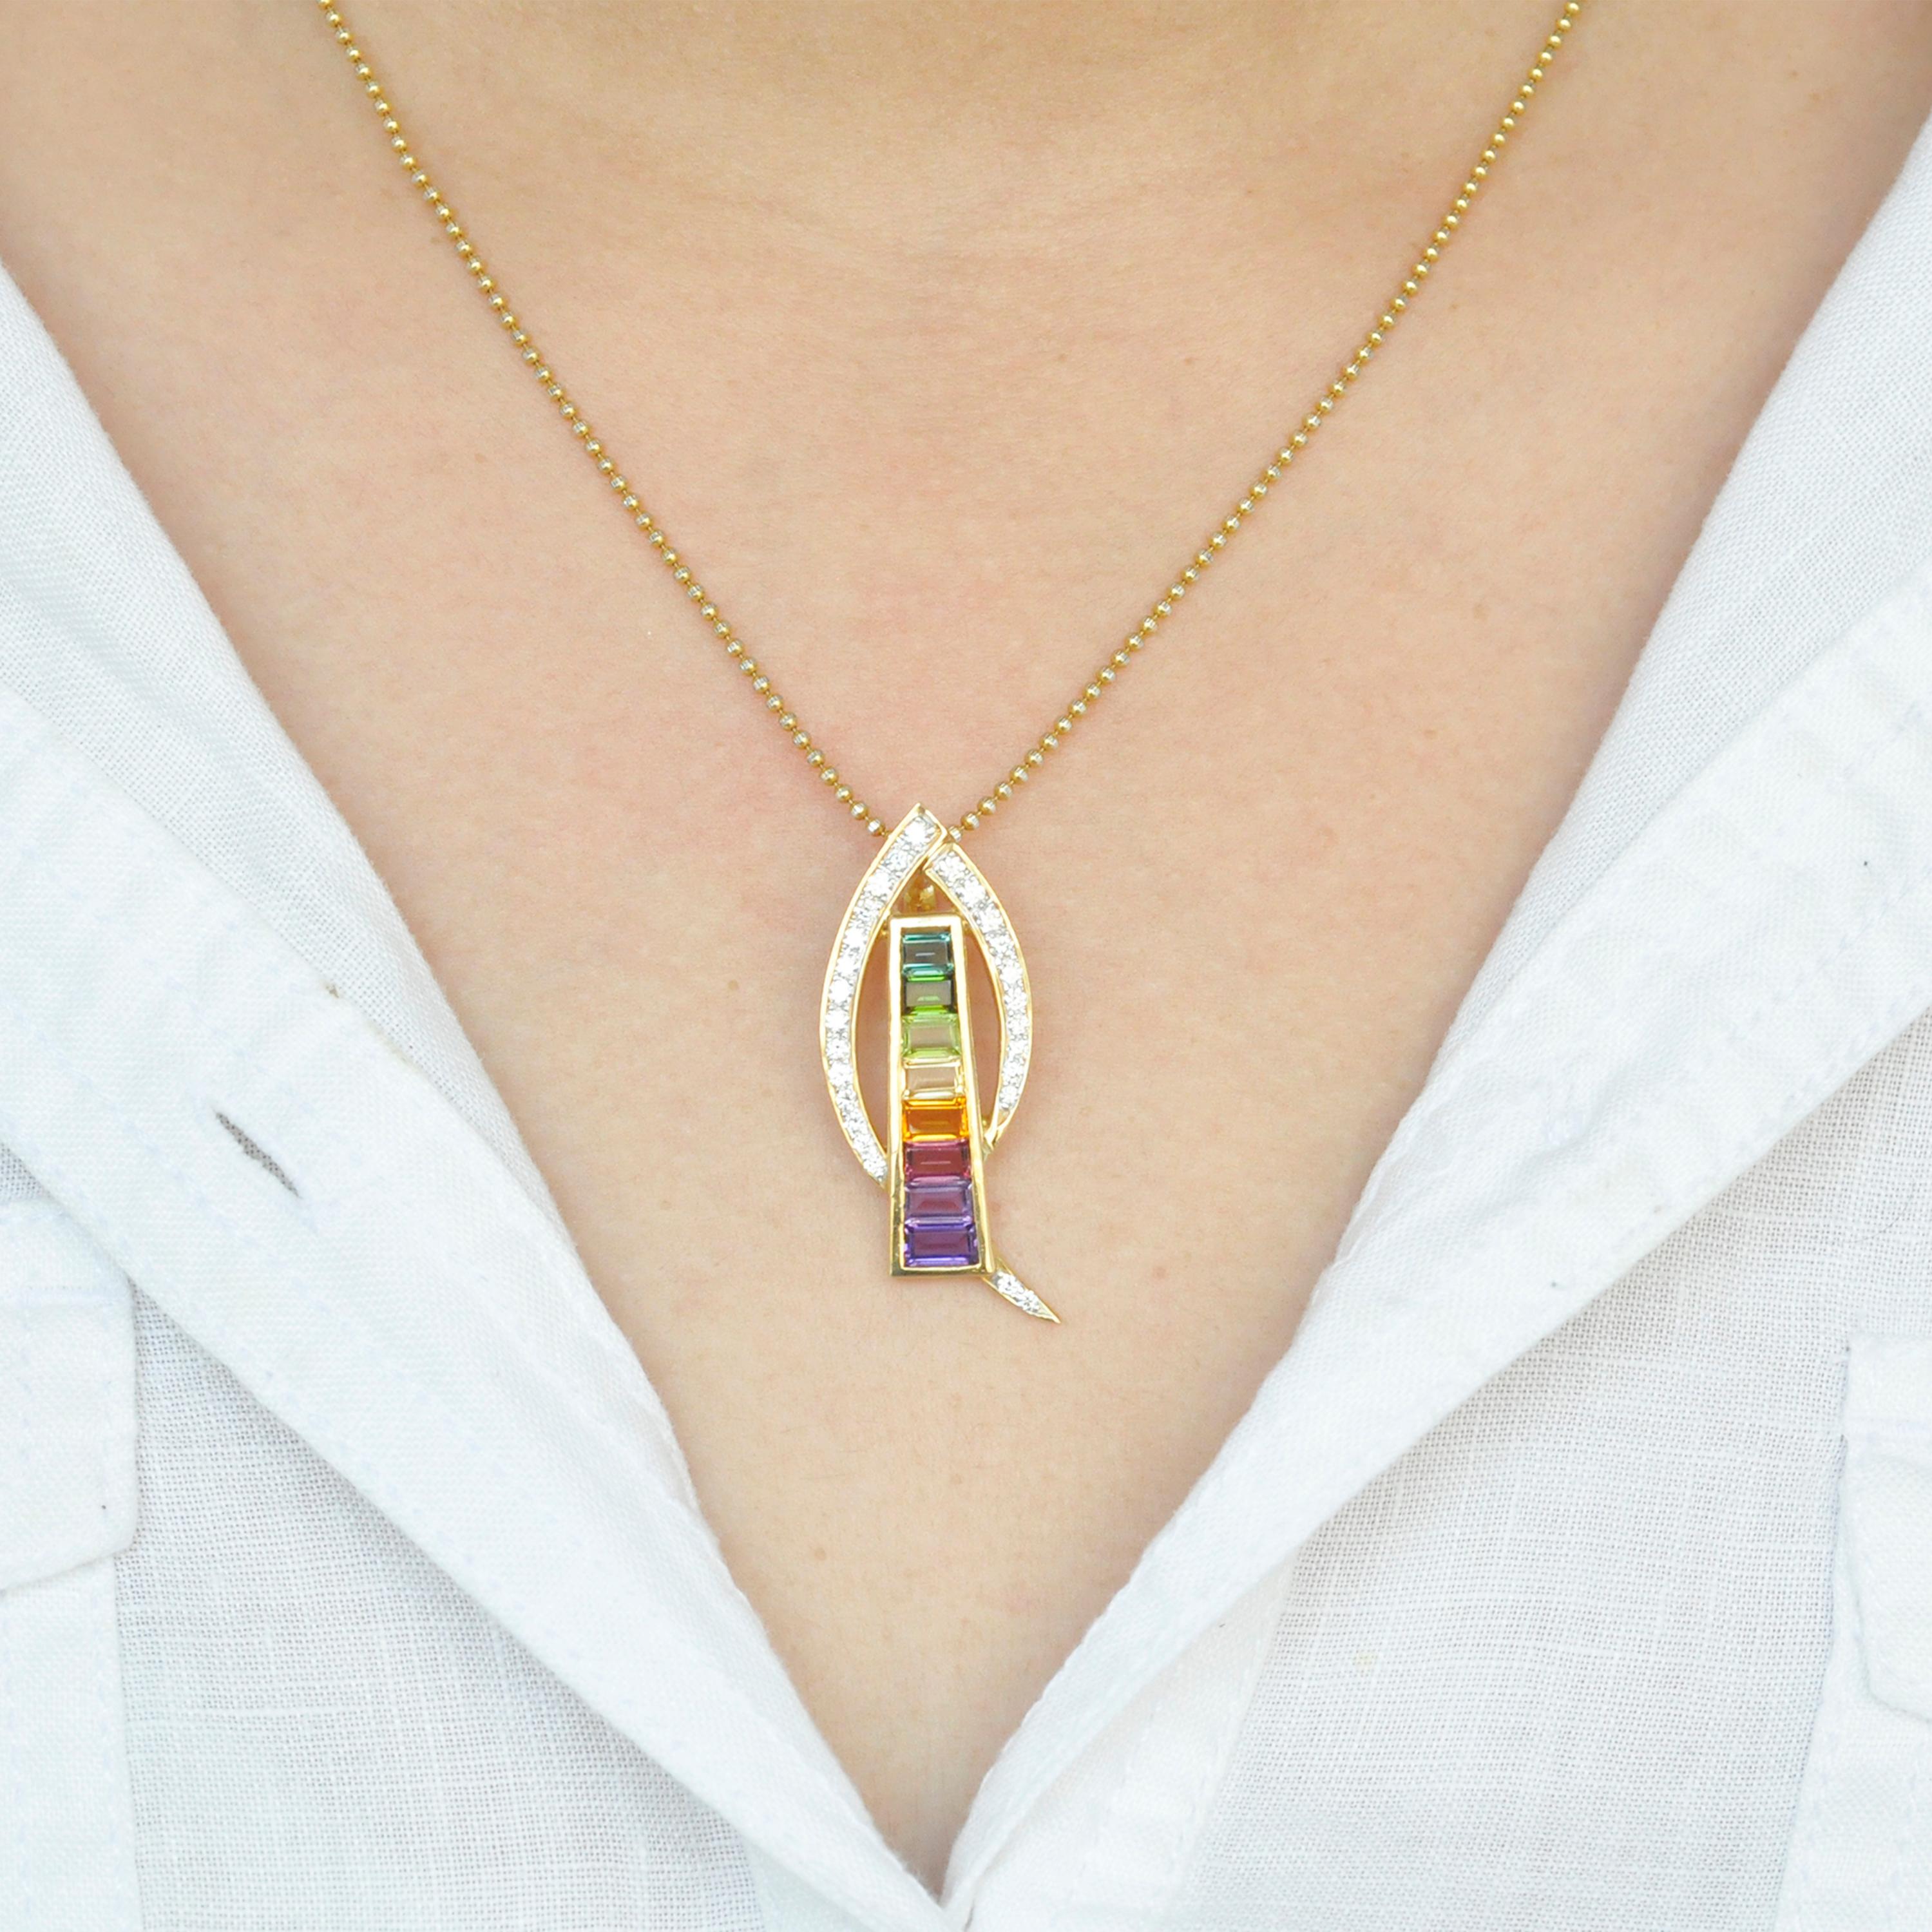 18 karat gold contemporary rainbow multicolor gemstone diamond pendant necklace

This elegant chic multicolor rainbow pendant is made in 18 karat yellow gold. The beauty of this pendant lies in the simplicity yet the piece is made with international